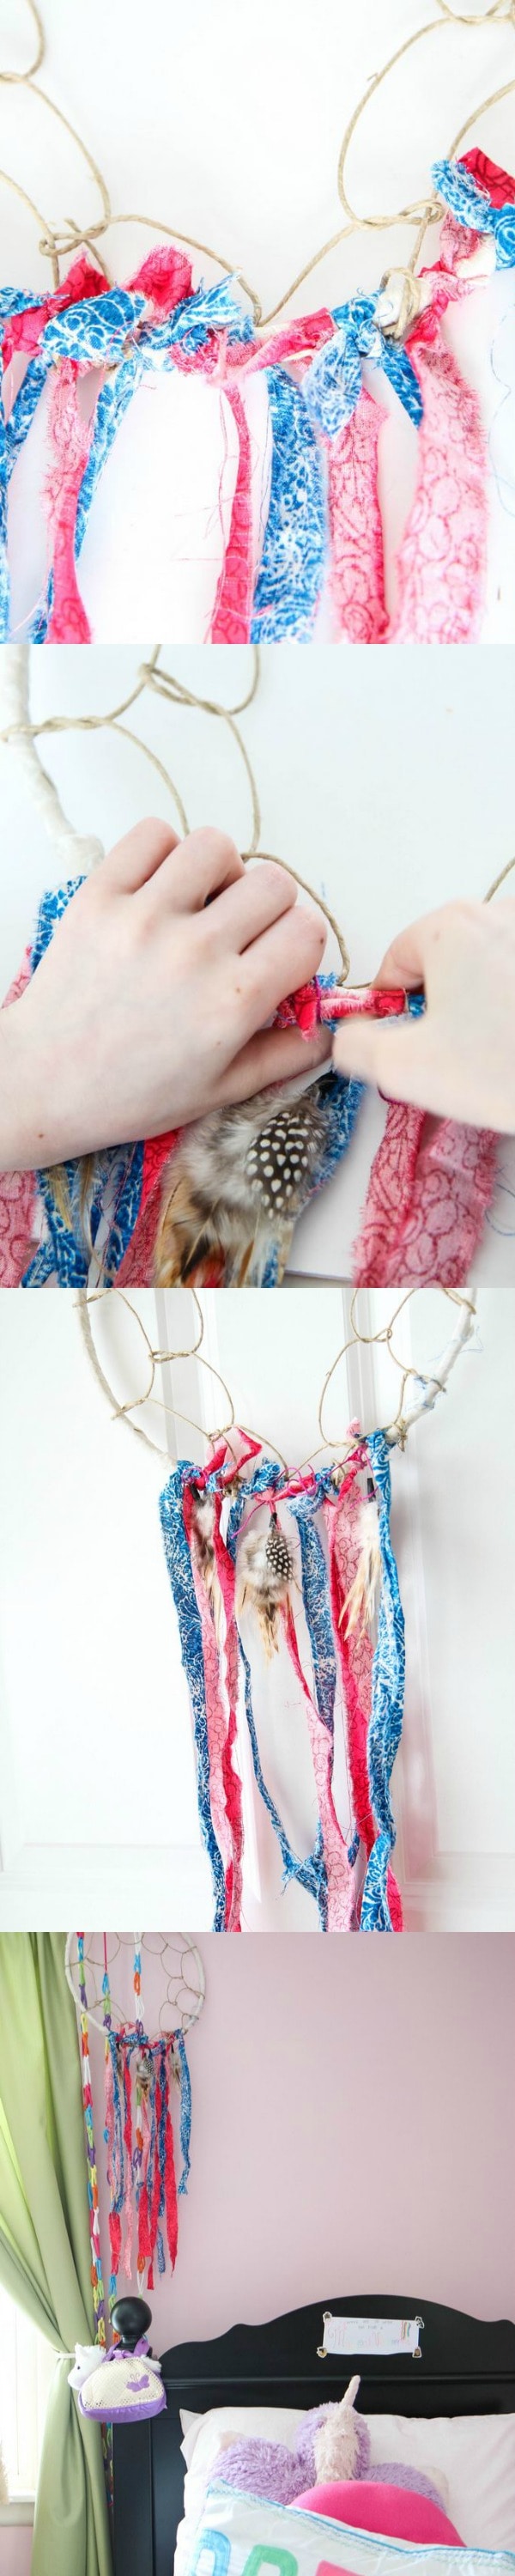 How To Make a Dream Catcher from MomAdvice.com